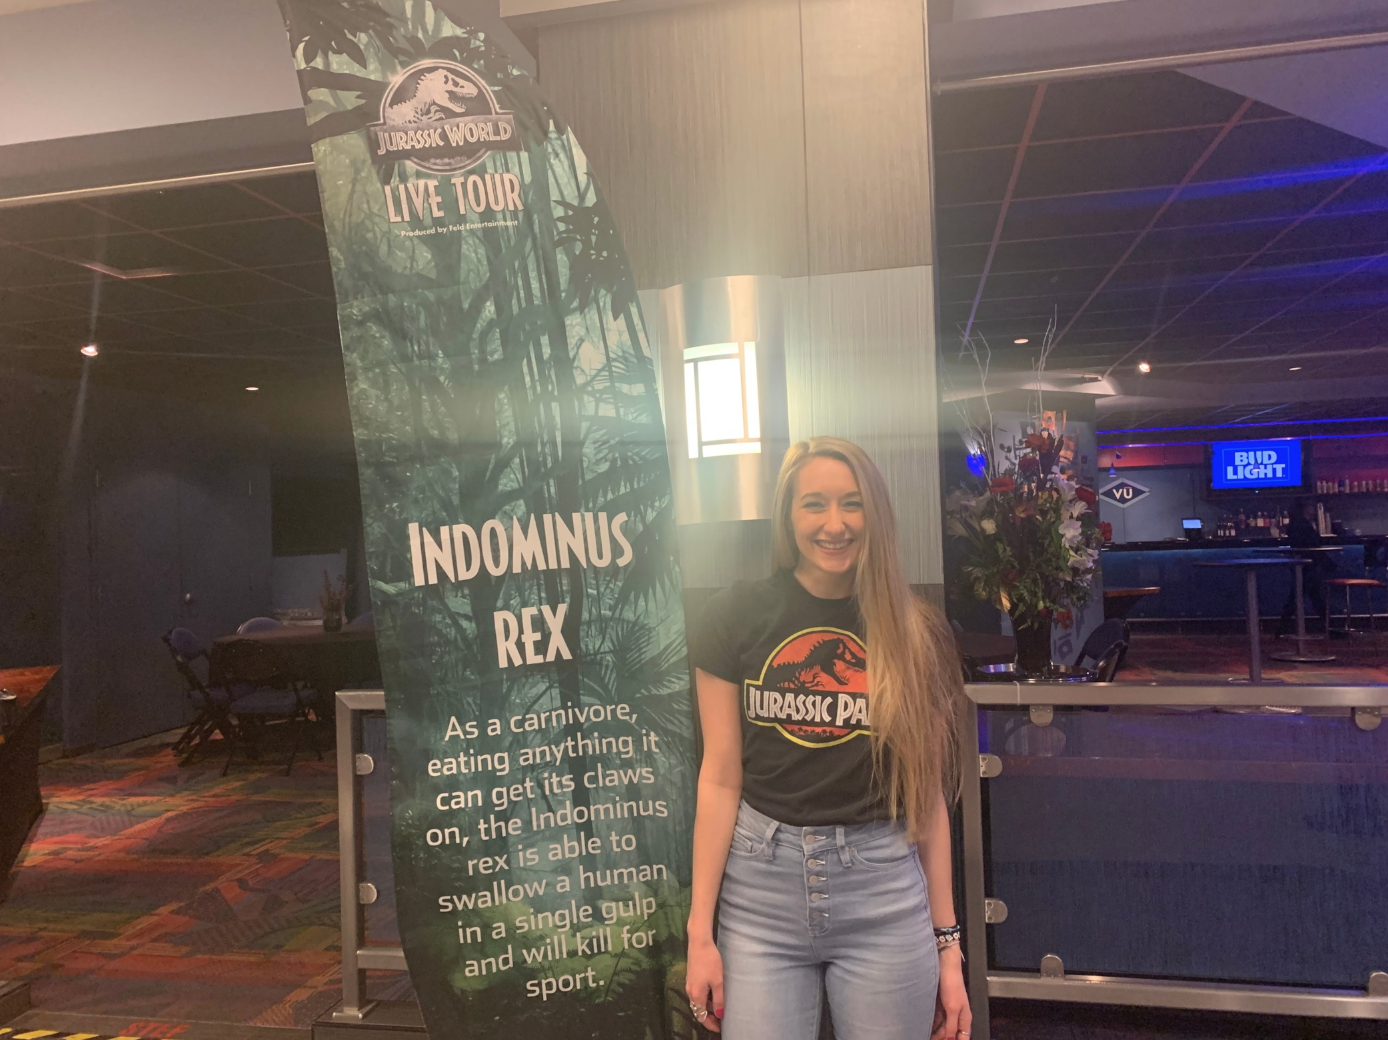 Holy Dinosuars! My Review of Seeing ‘Jurassic World Live’ in 2020